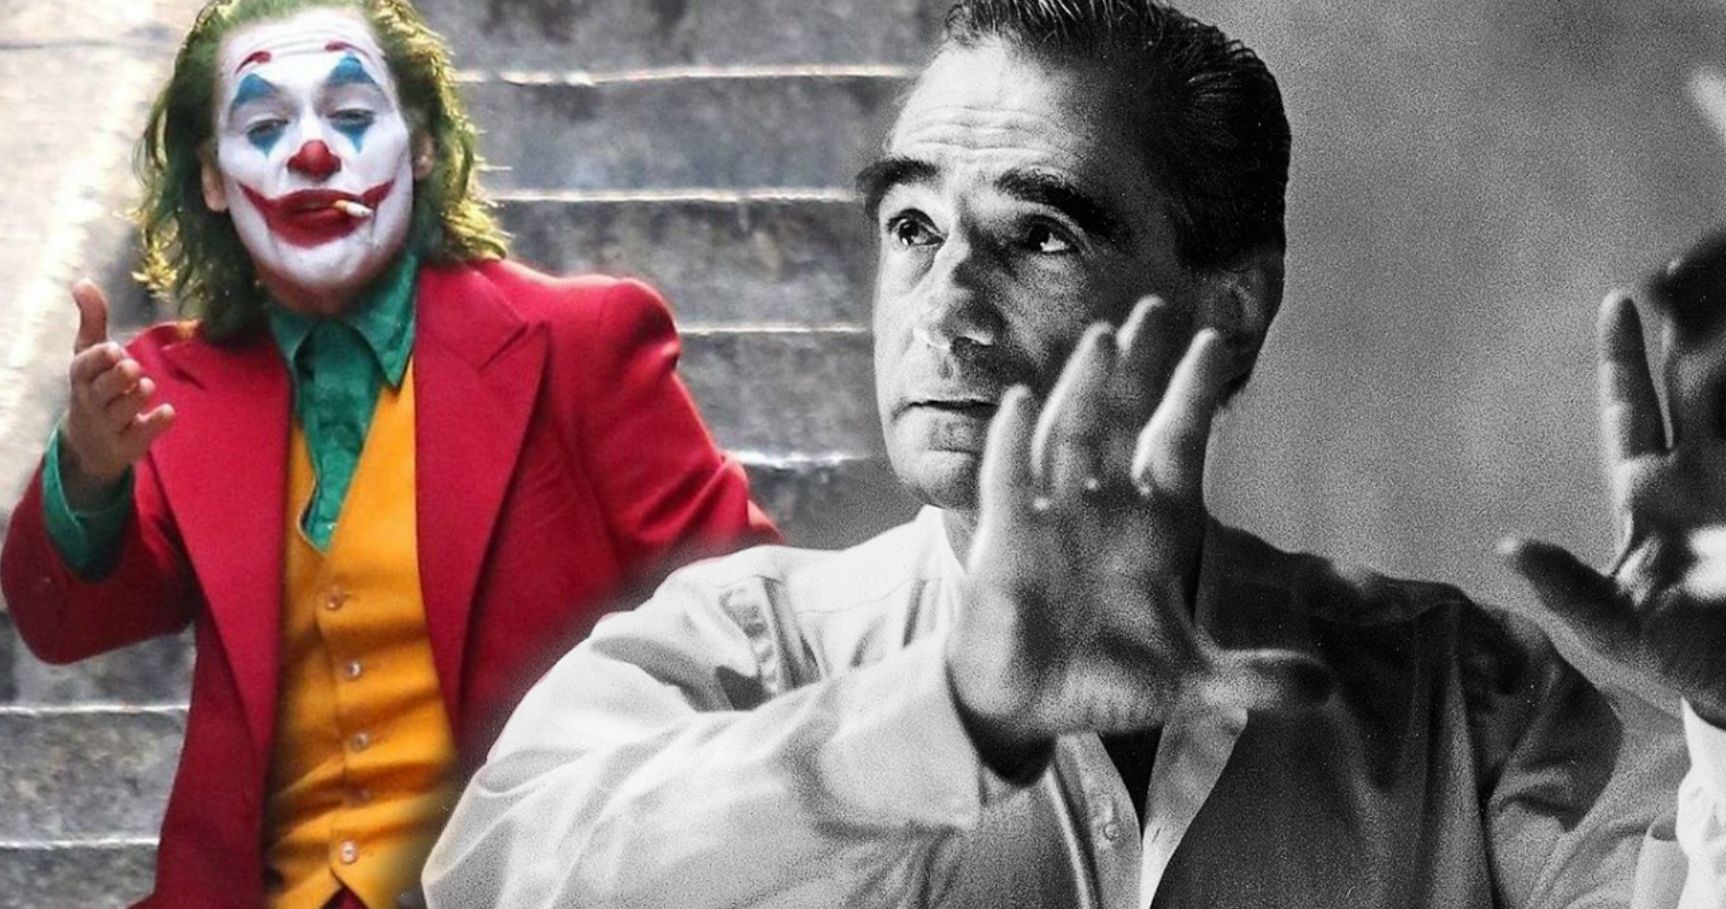 Scorsese Wanted to Direct Joker for Years, But Couldn't Find the Time